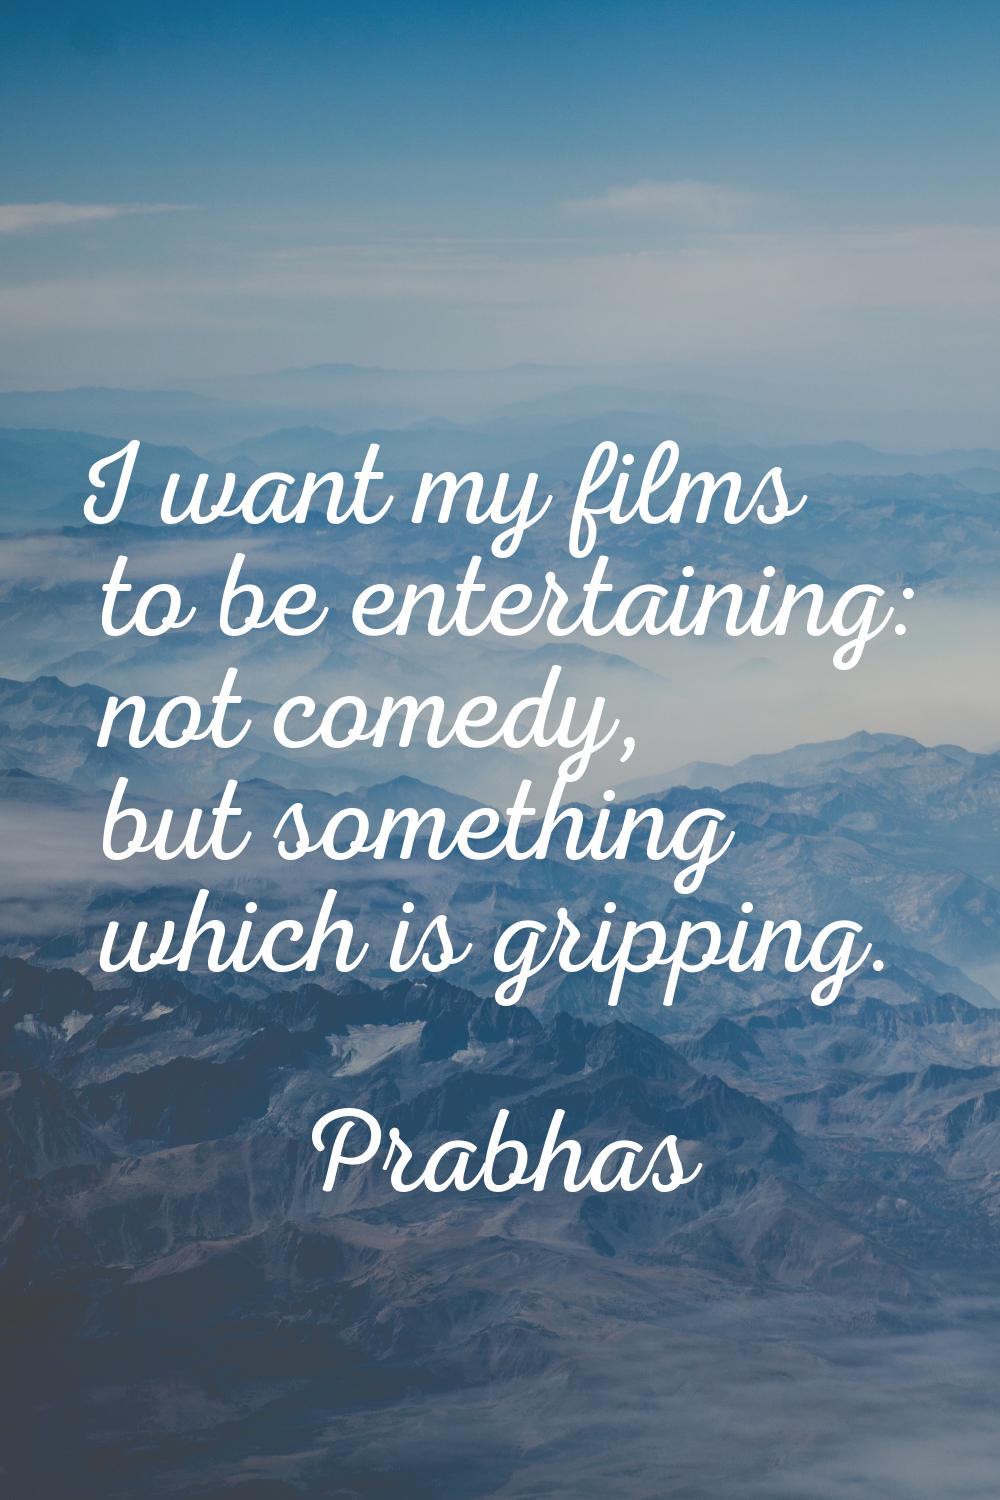 I want my films to be entertaining: not comedy, but something which is gripping.